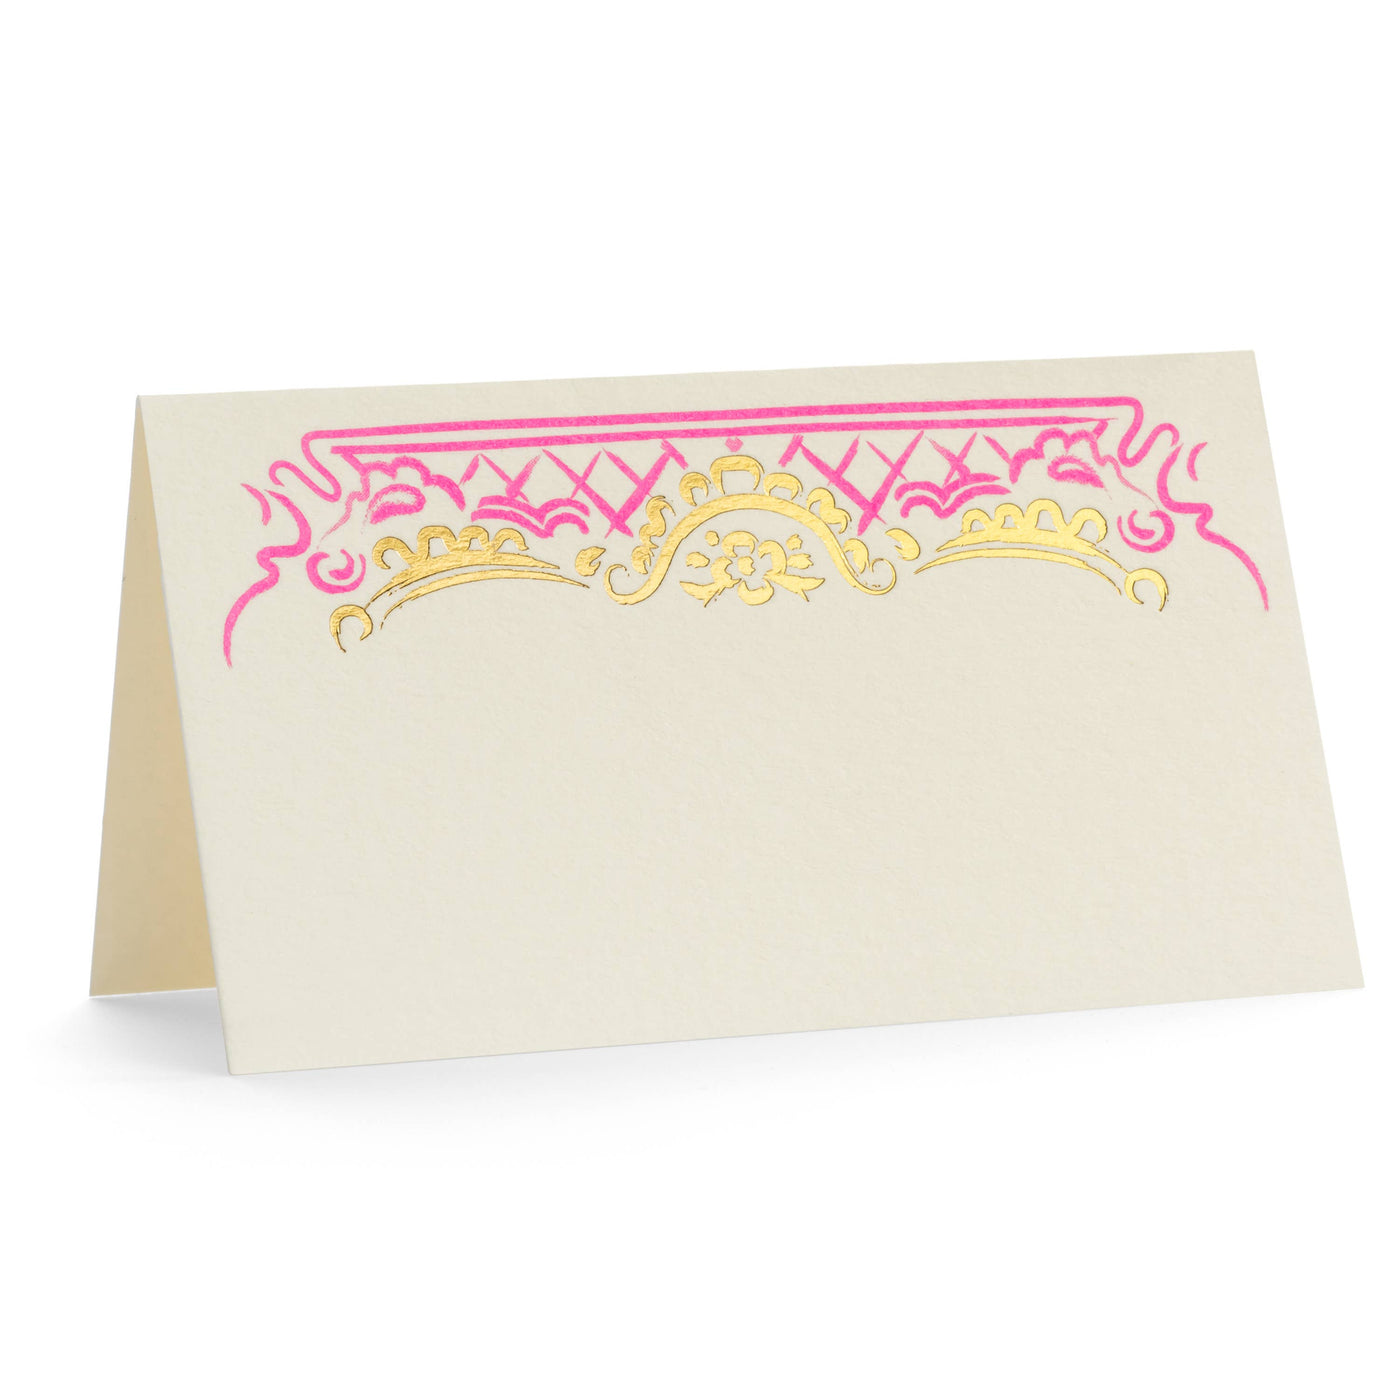 Nicole in Pink Place Cards